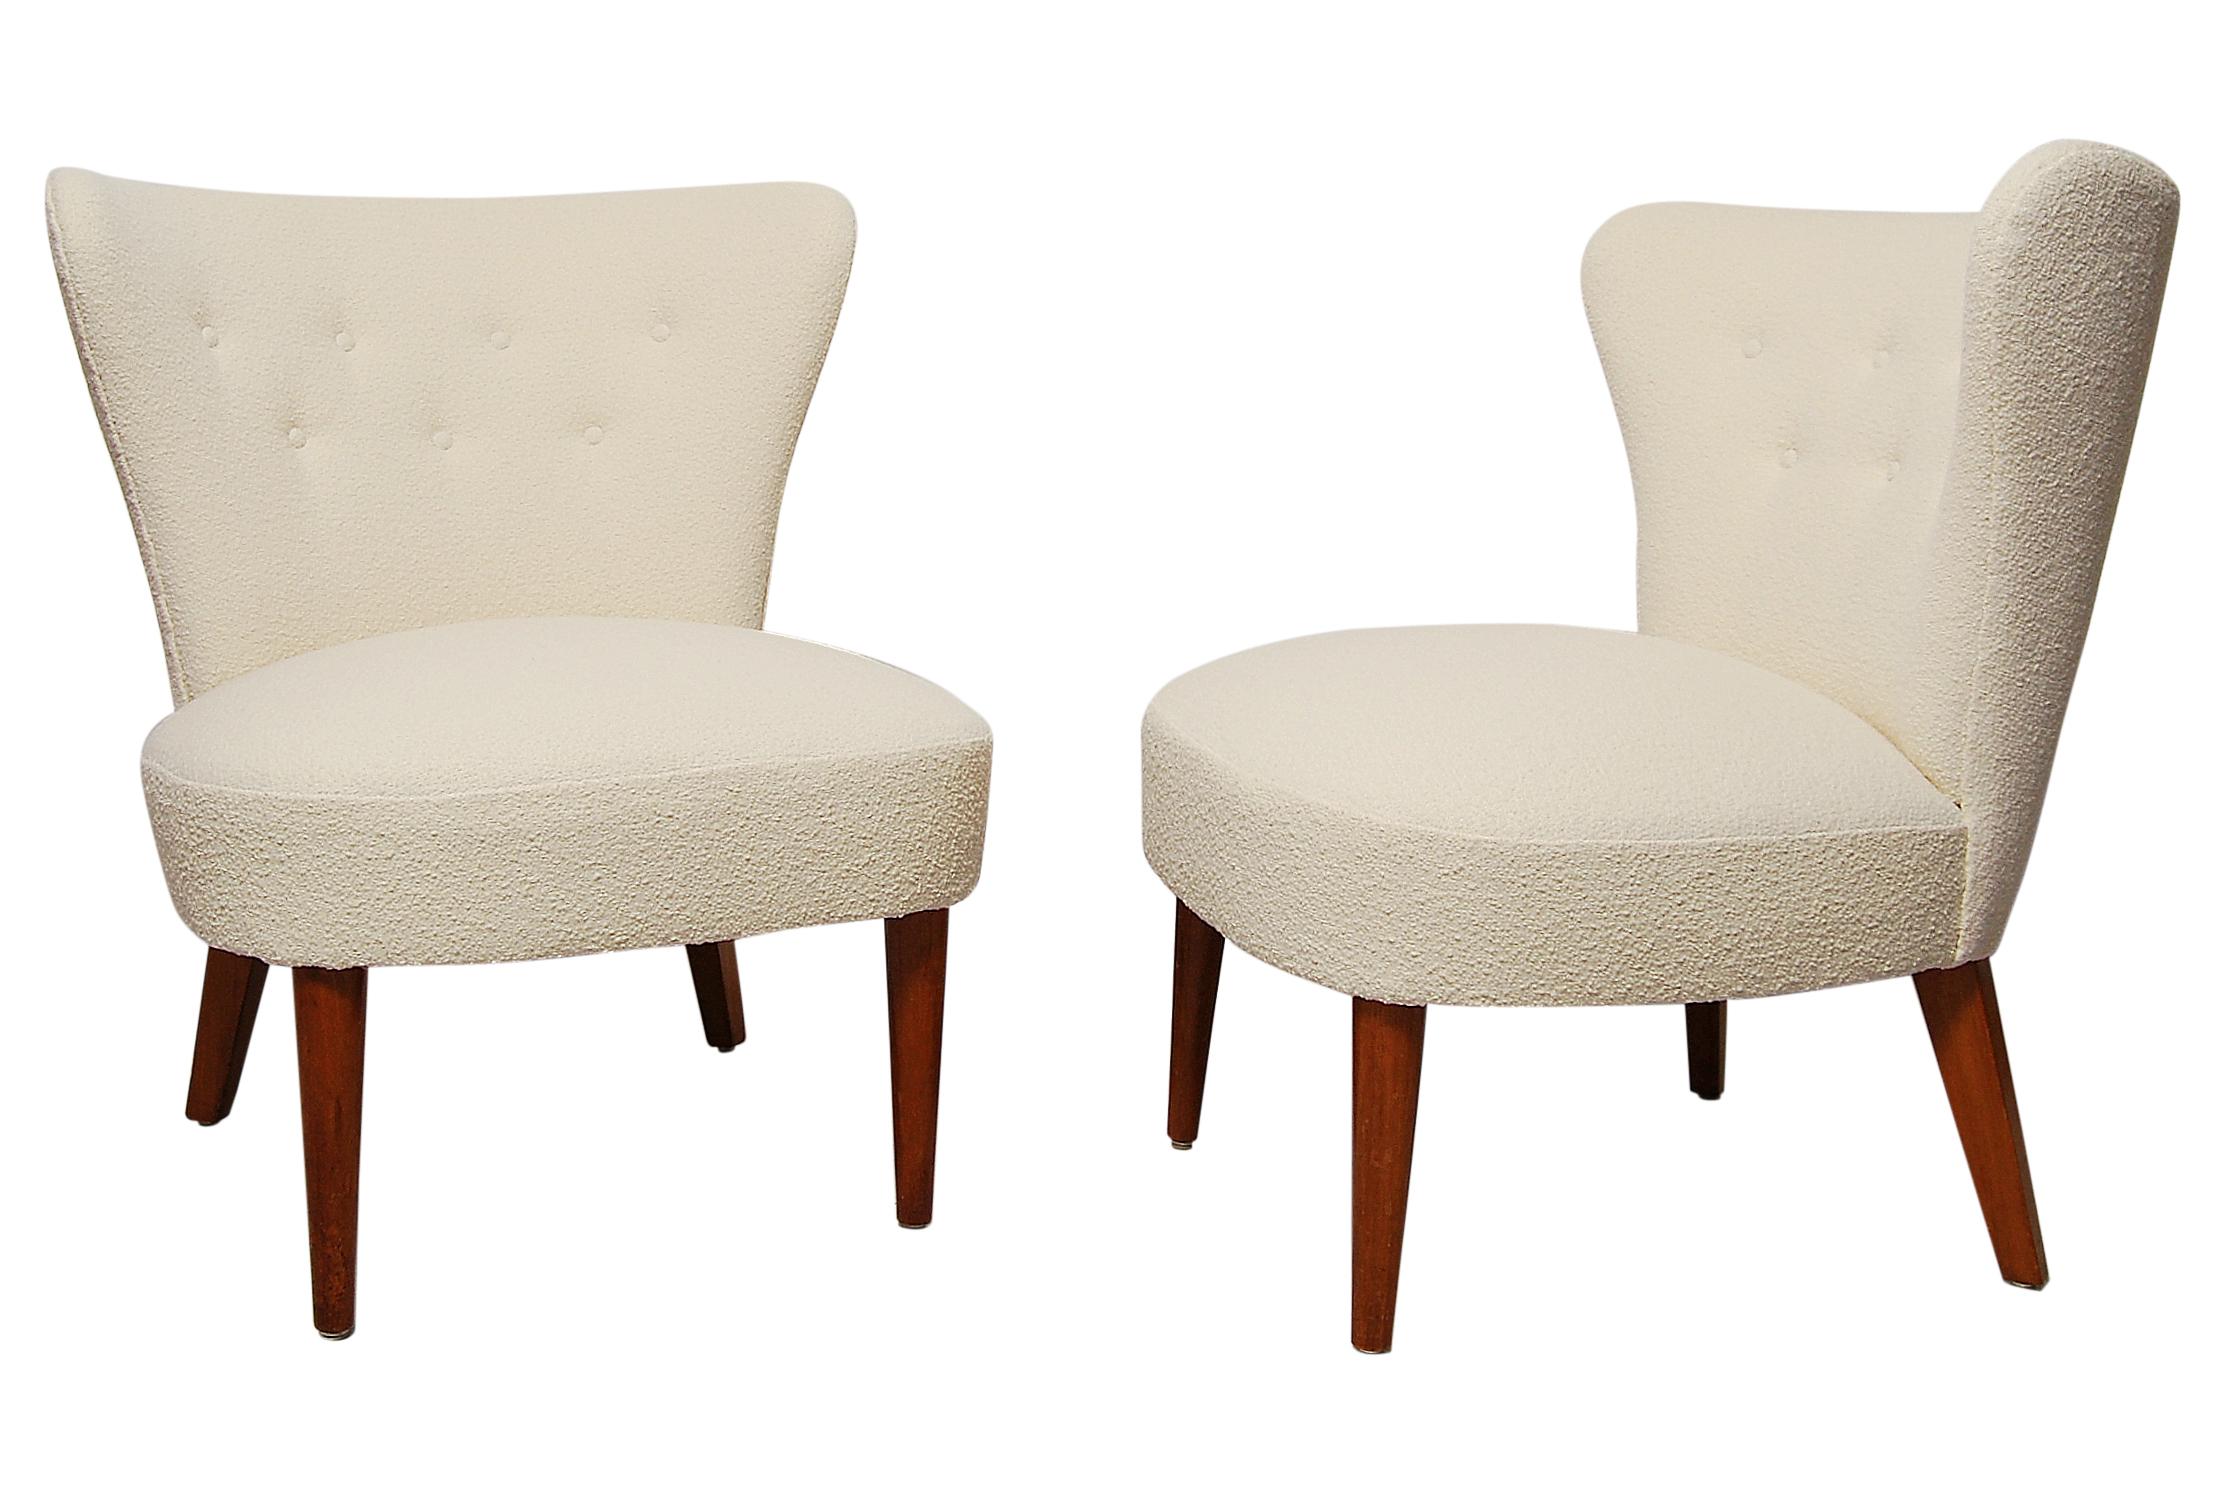 Swedish Midcentury Boucle Lounge Chairs For Sale at 1stDibs